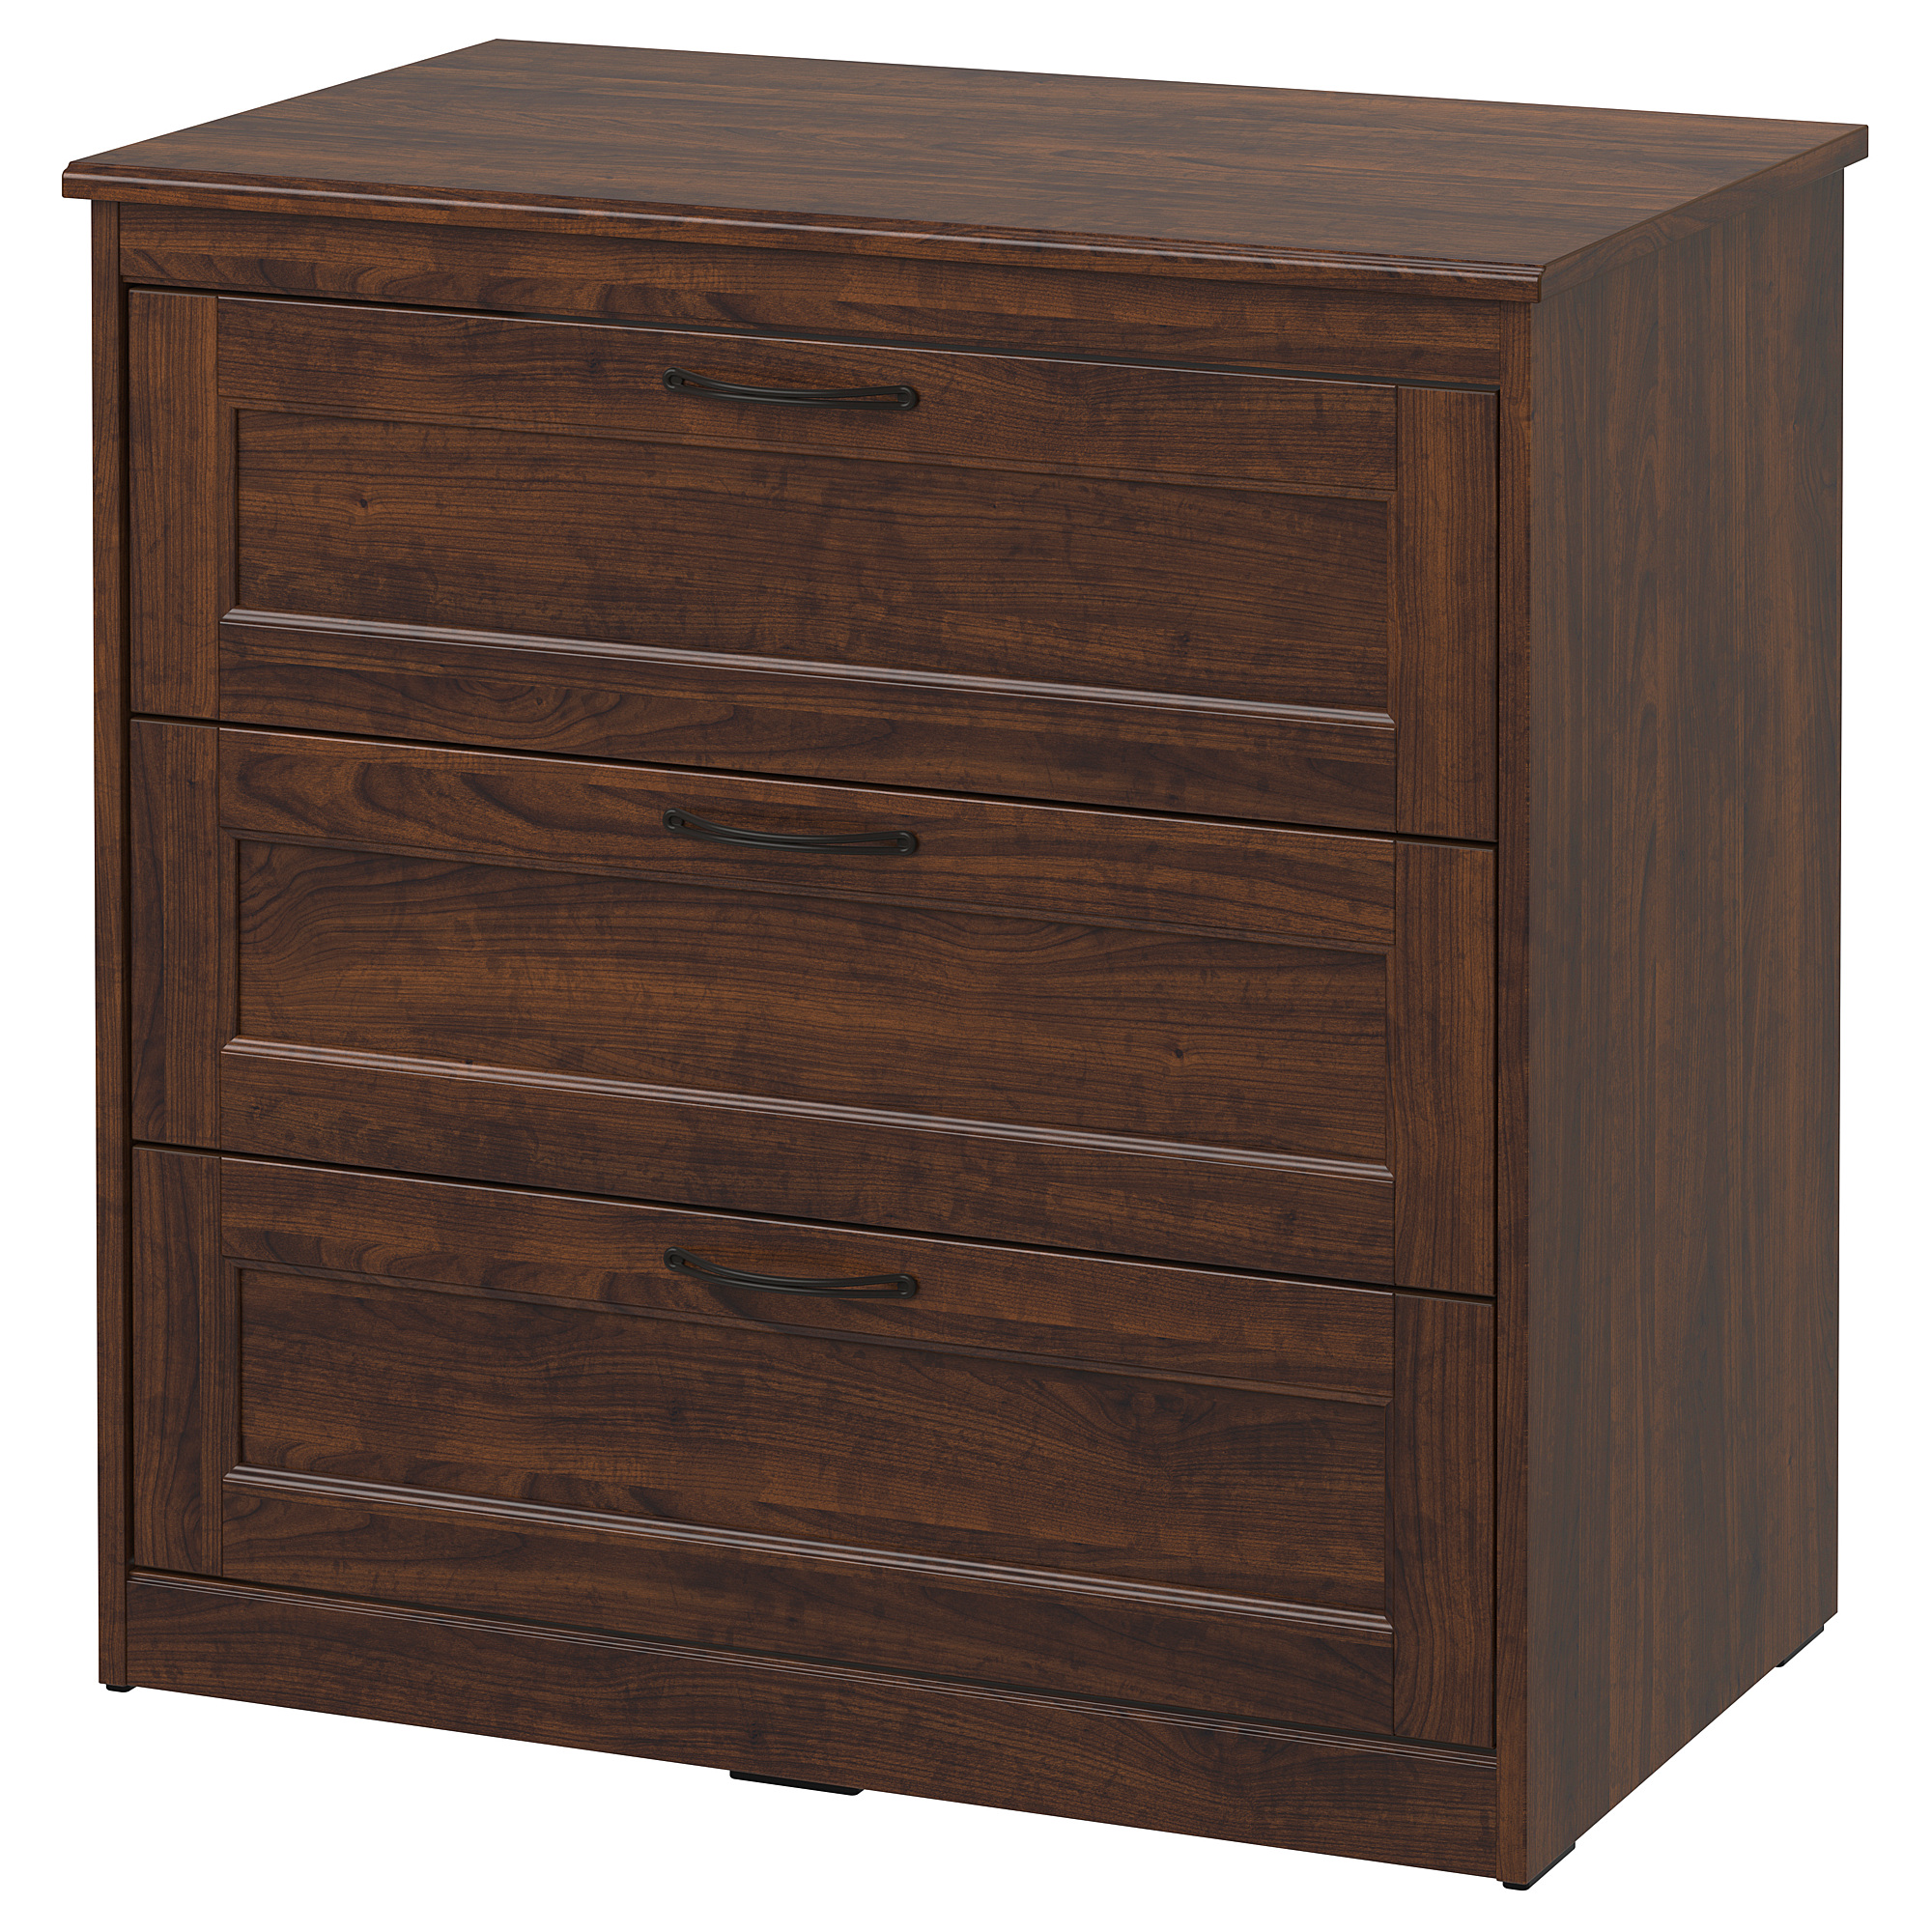 SONGESAND chest of 3 drawers